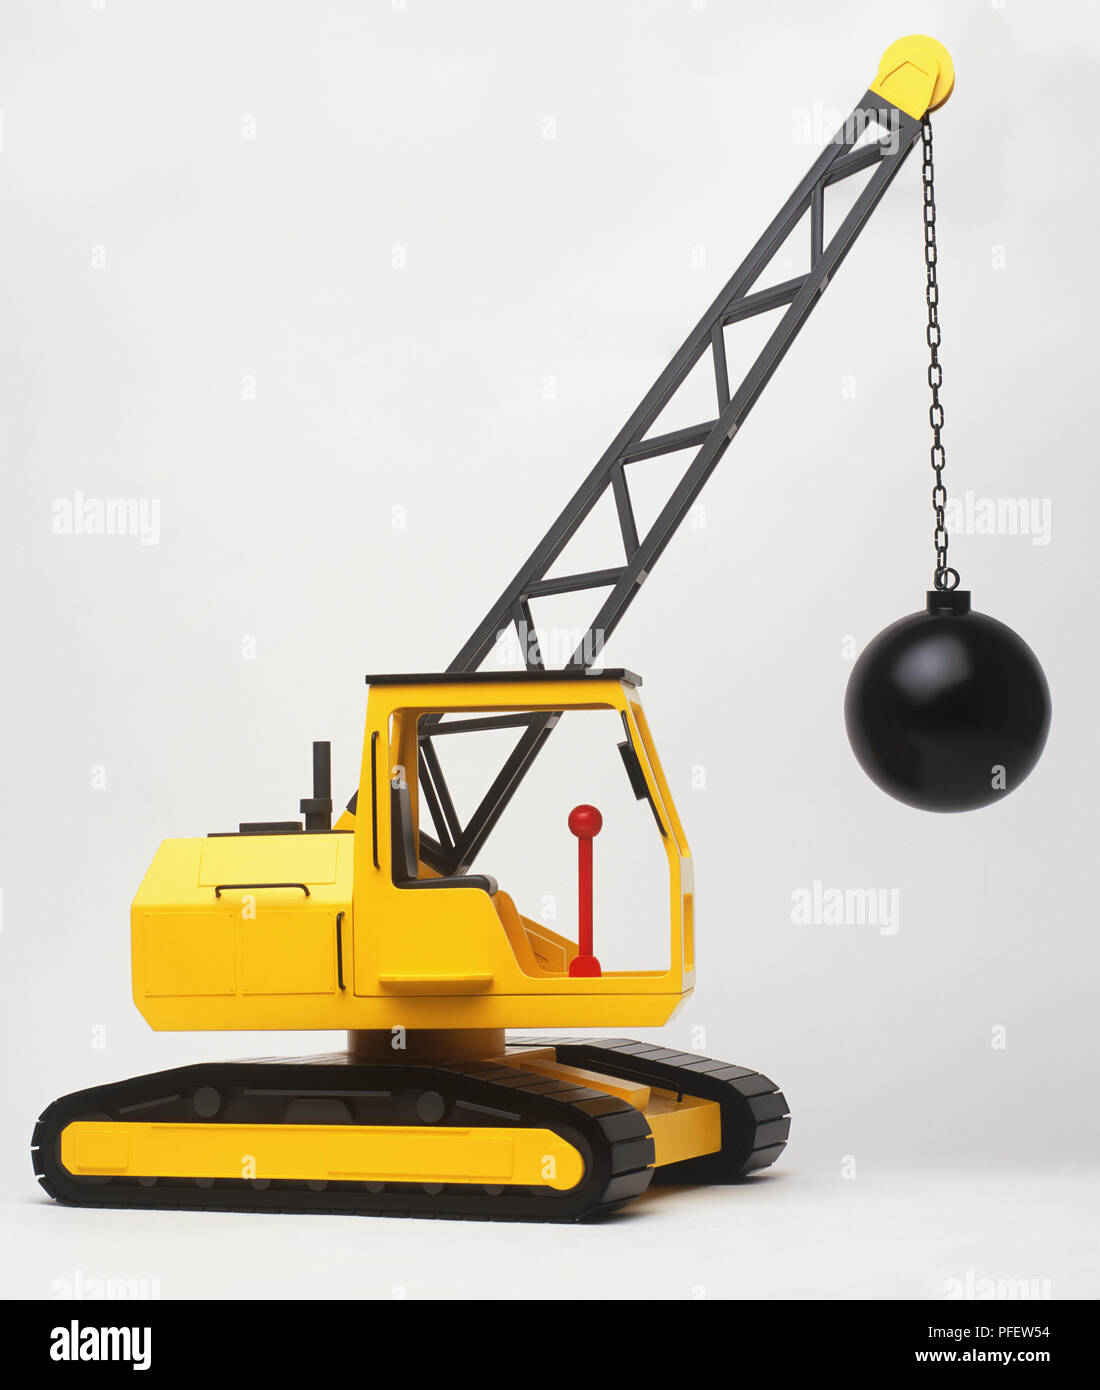 Toy crane with a demolition ball hanging from the arm Stock Photo - Alamy